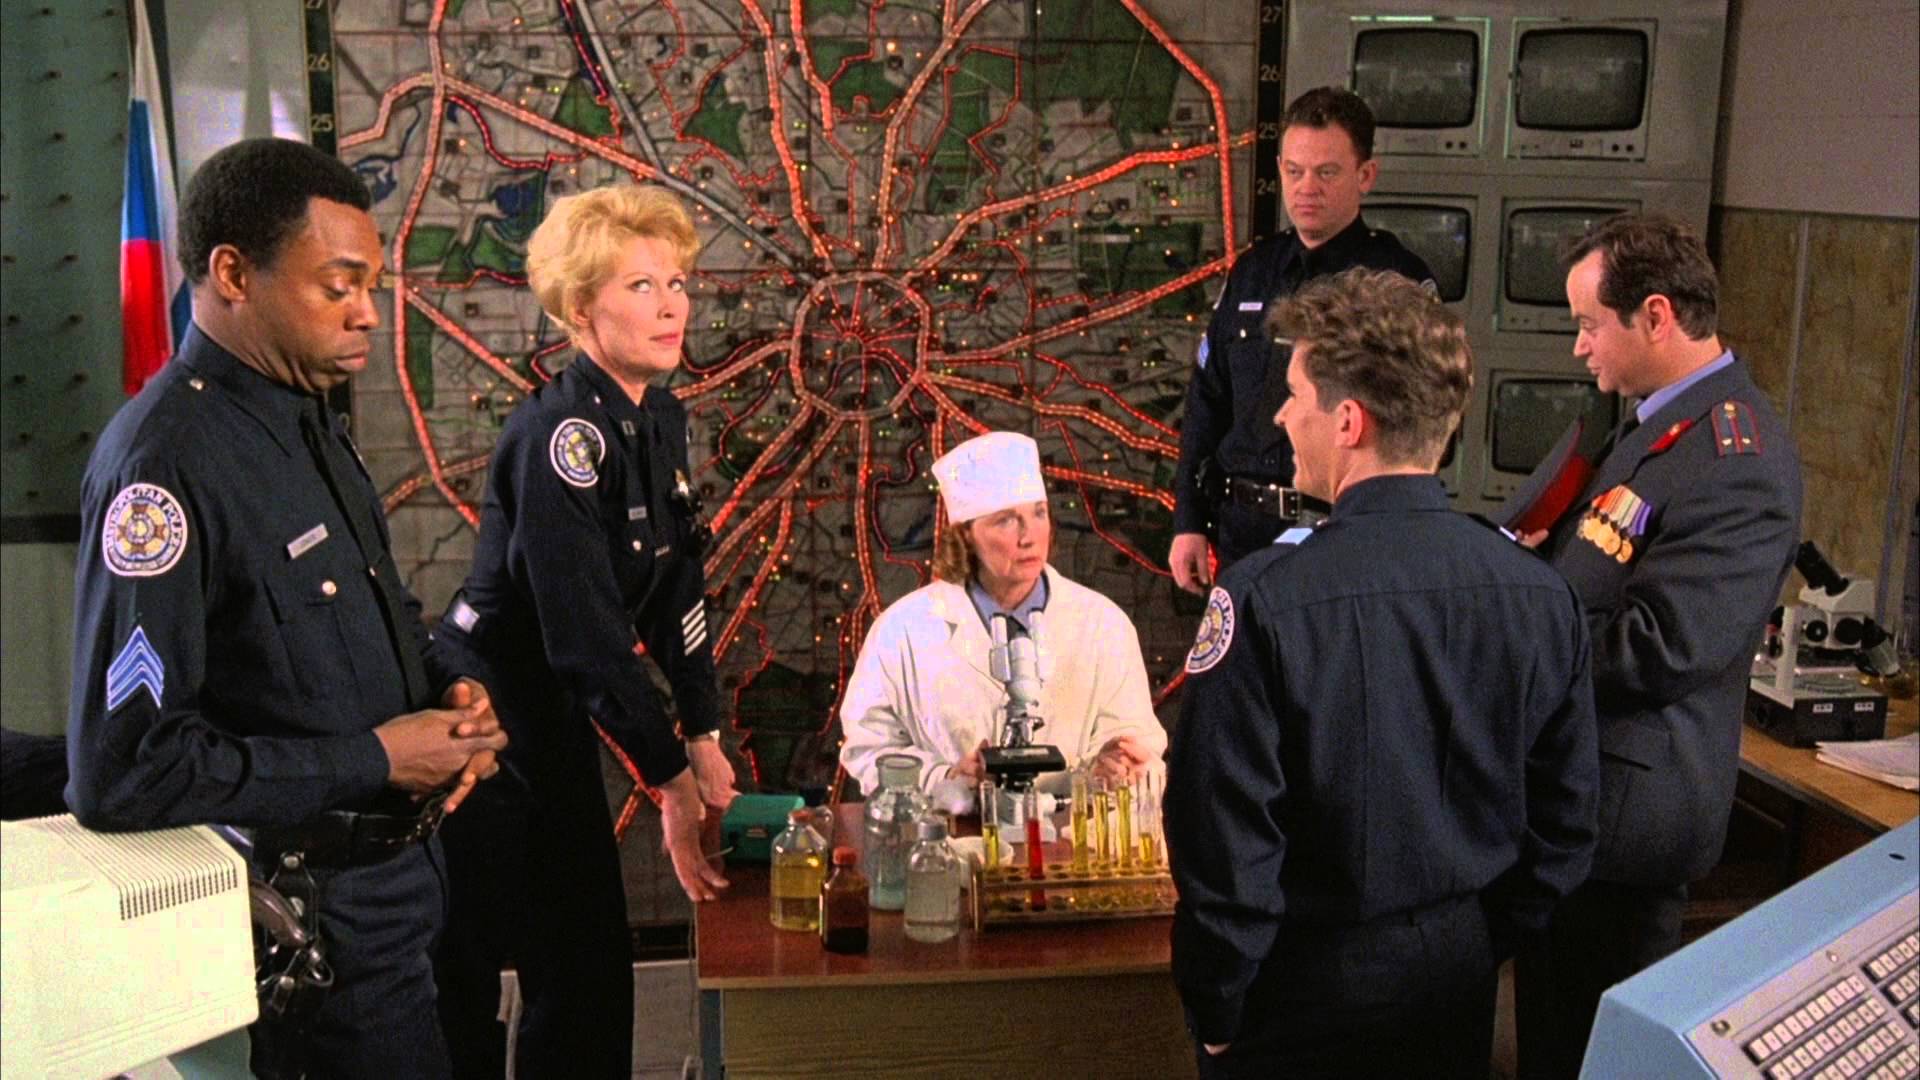 The “Police Academy” Franchise: 6.”Police Academy: Mission to Moscow” & Franchise Wrap-Up